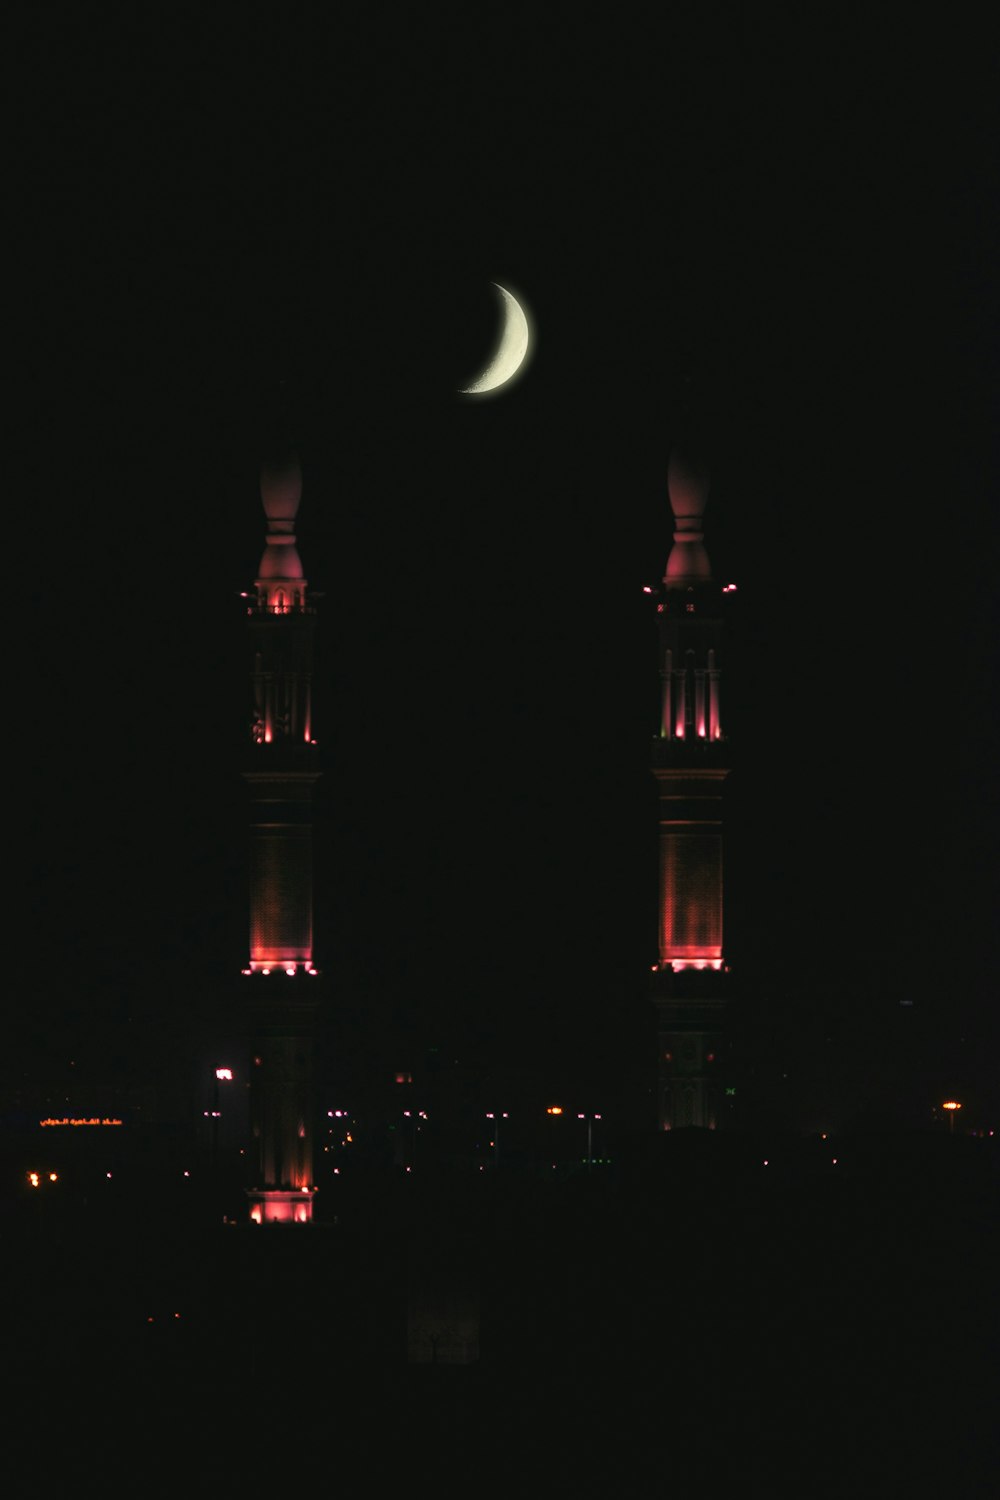 crescent moon above buildings lighted at night